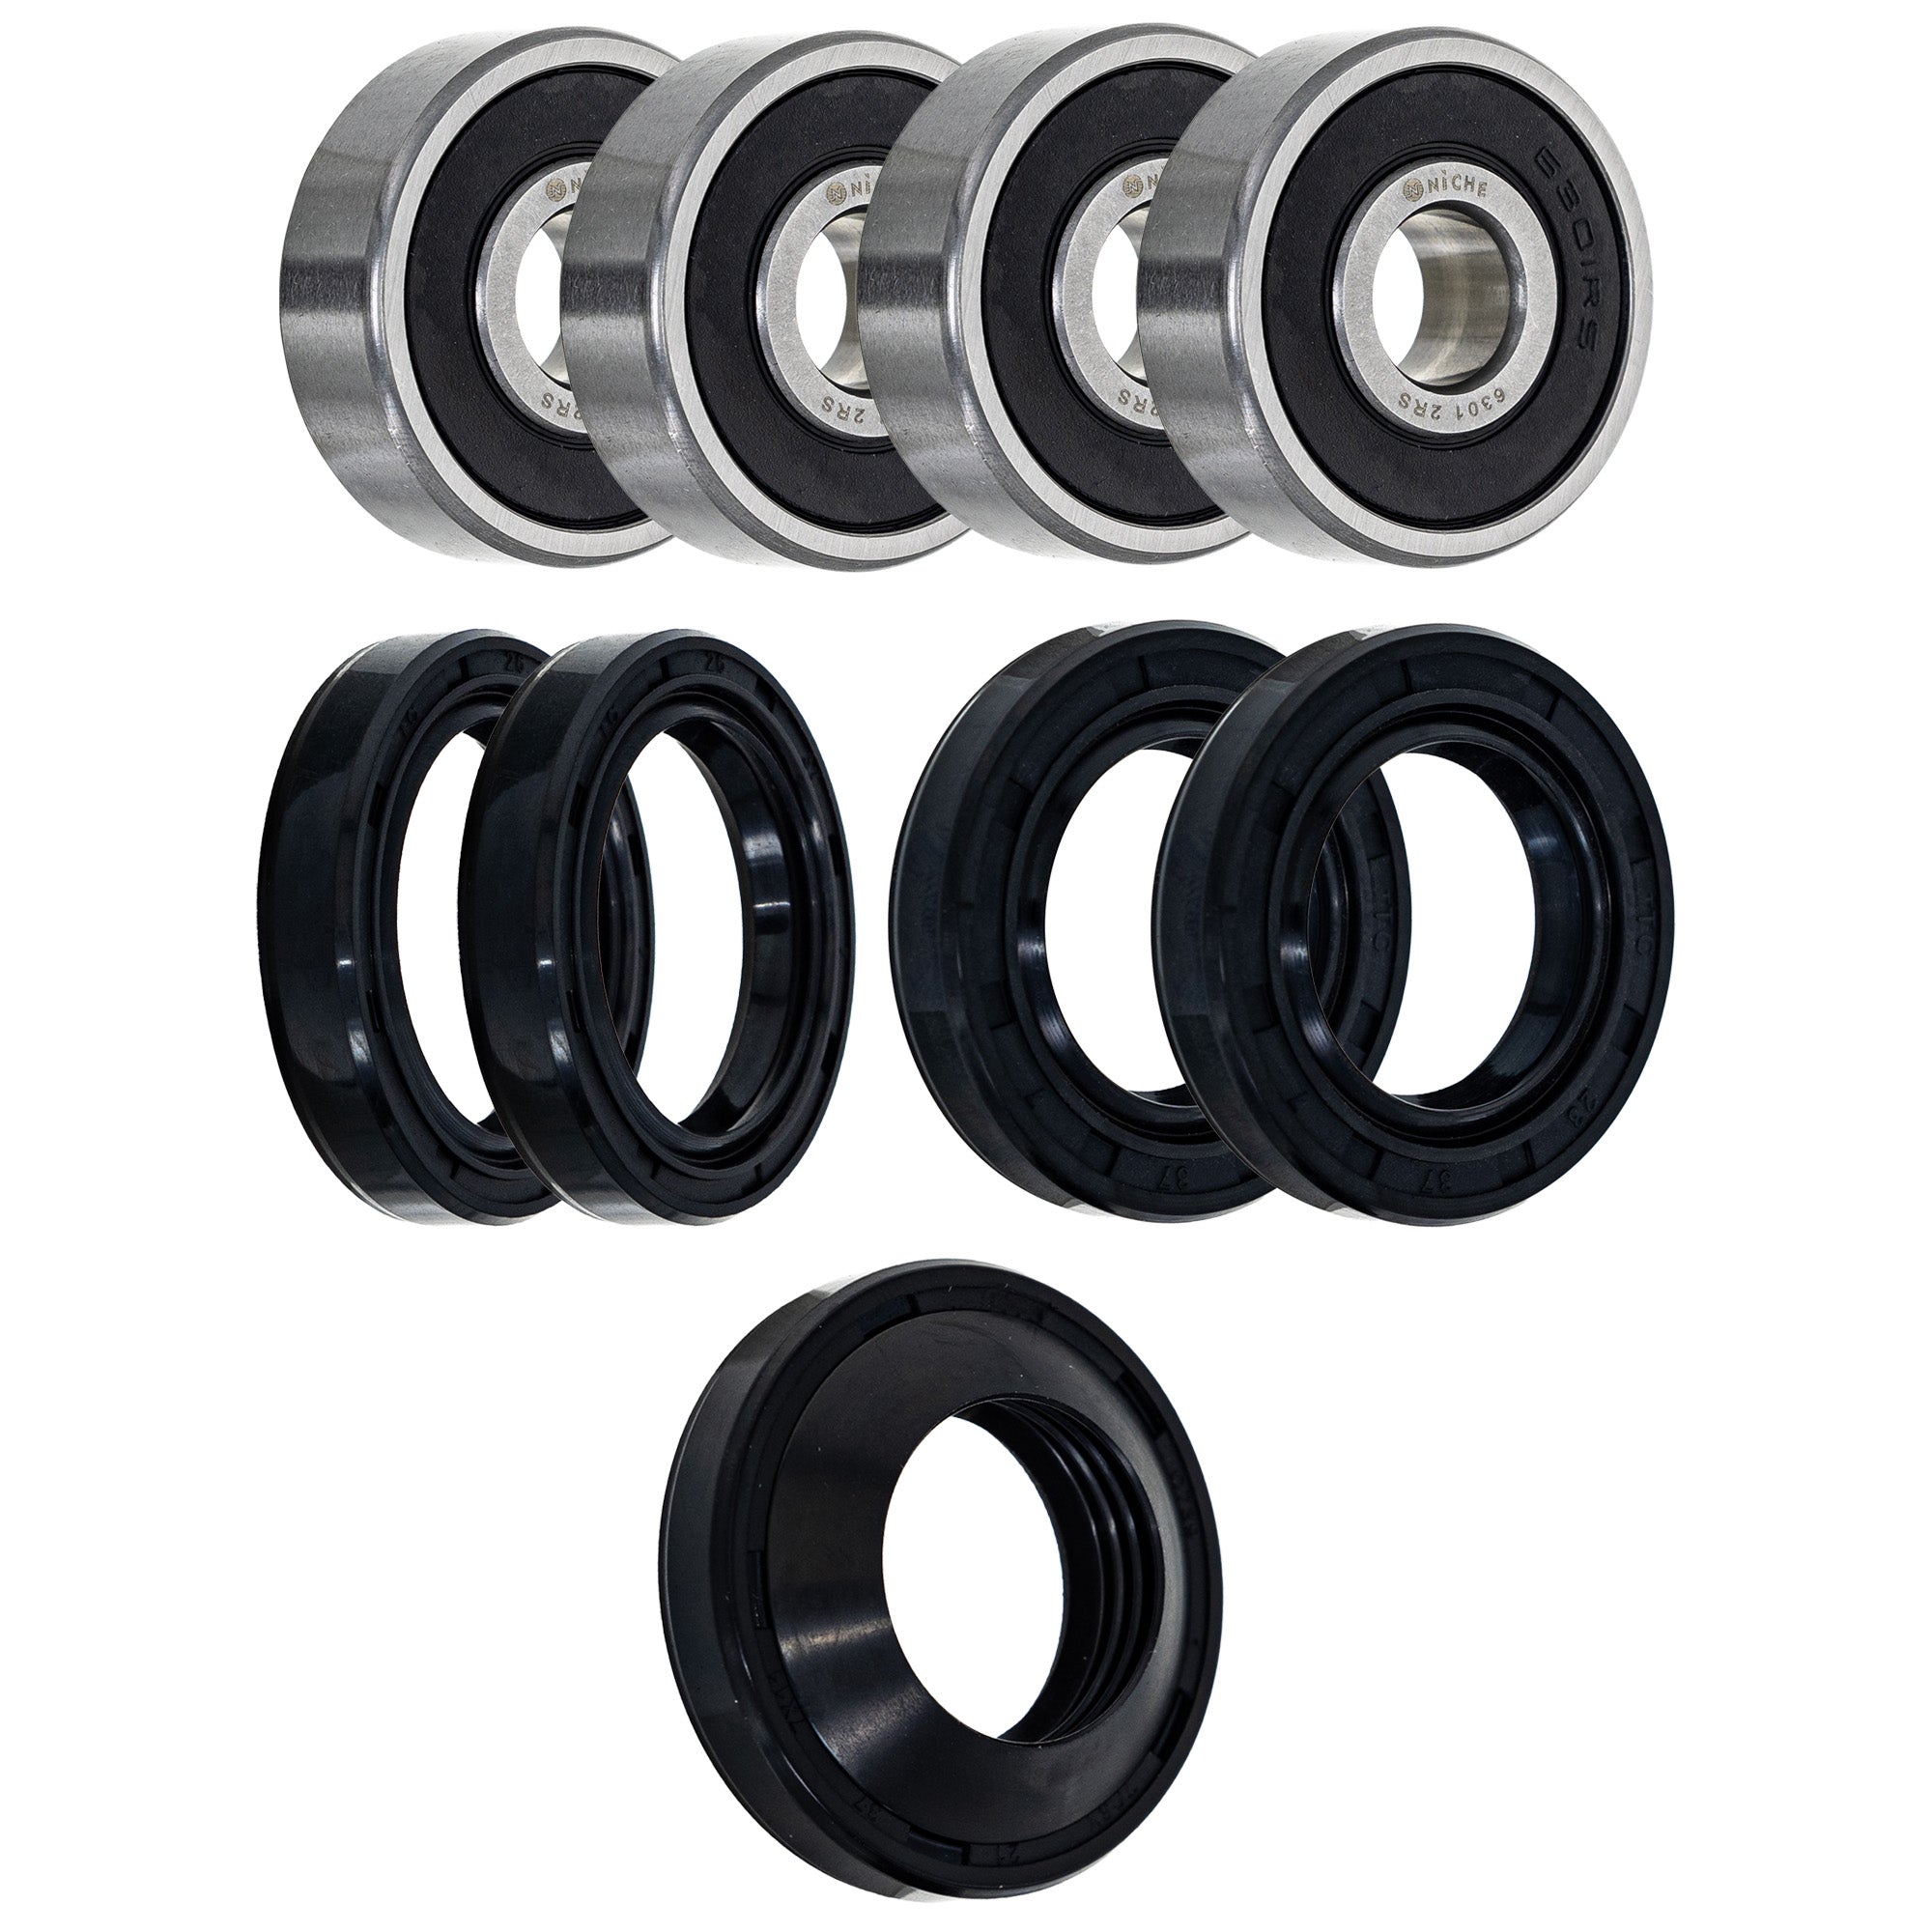 Wheel Bearing Seal Kit for zOTHER XR80 XR100 XL80S Trail NICHE MK1008789